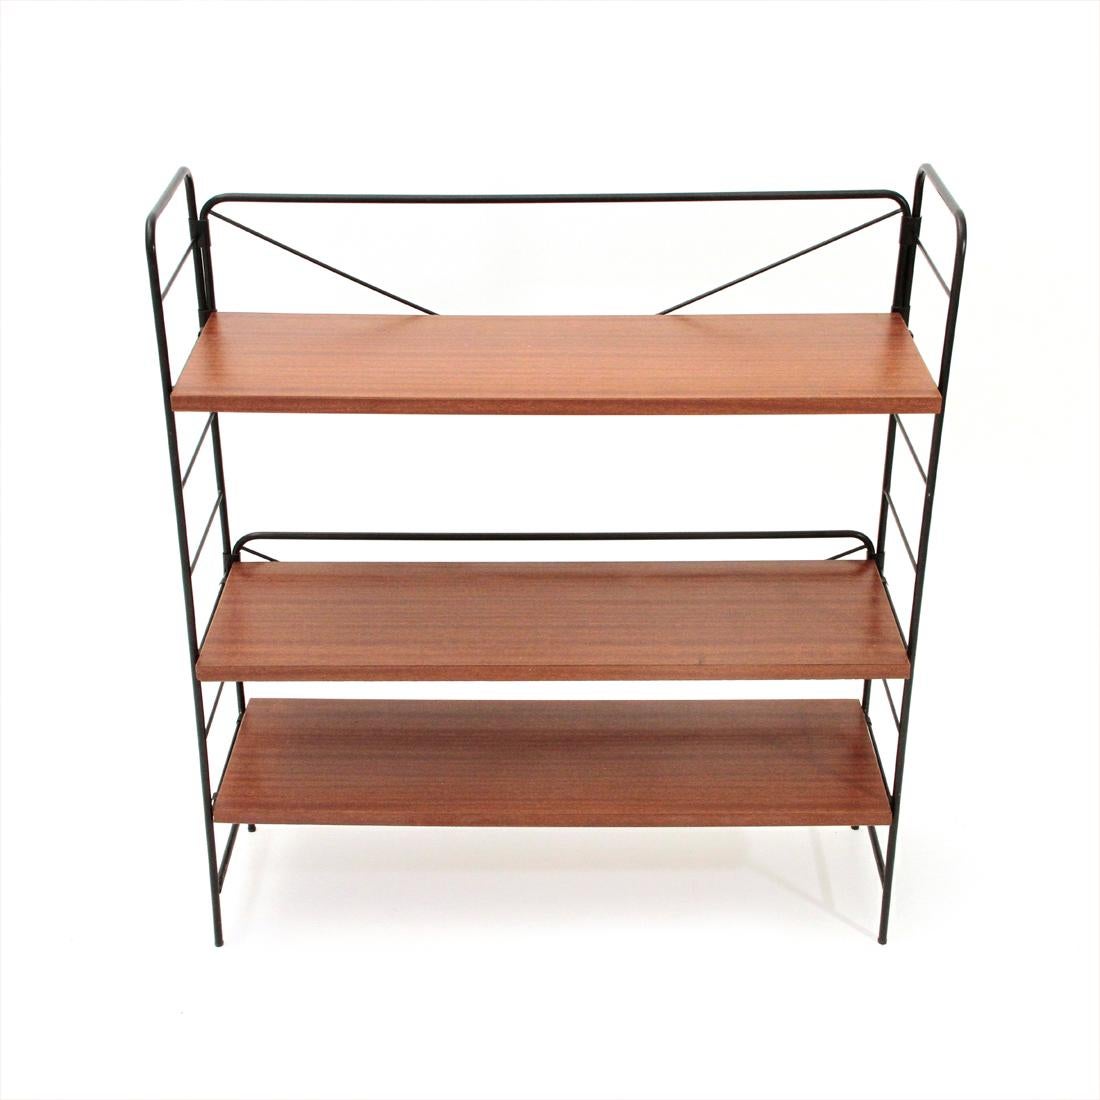 Italian manufacture bookcase produced in the 1960s.
Black painted metal structure with three teak veneered wooden shelves.
Good general conditions, some signs due to normal use over time.

Dimensions: Width 82 cm, depth 26 cm, height 90 cm.